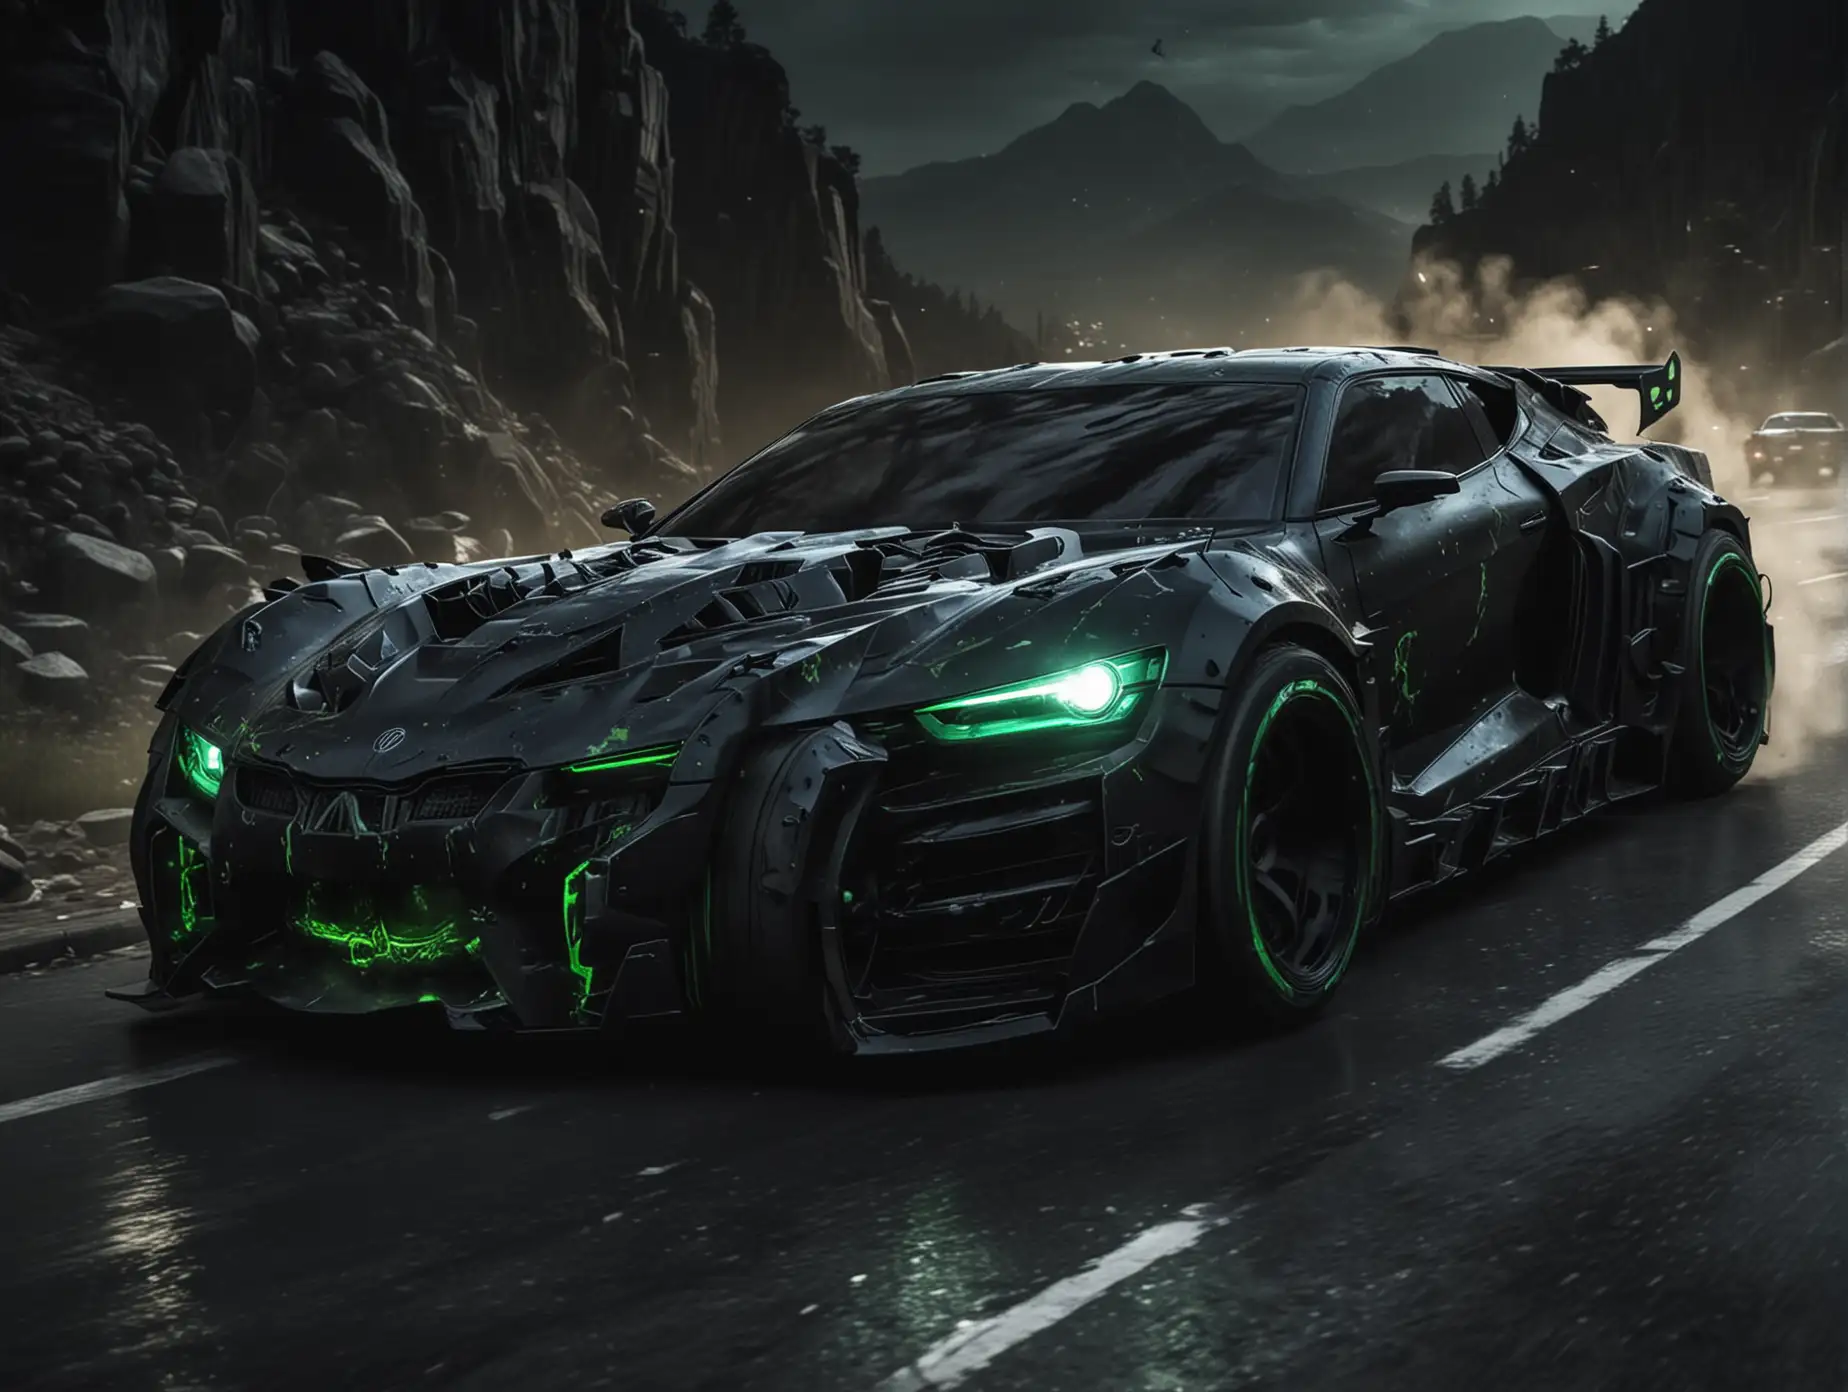 Create  futuristic cars from  dark Spiderman and hulk evil tuning drifting  at night on Downhill rear view from far away  car color black